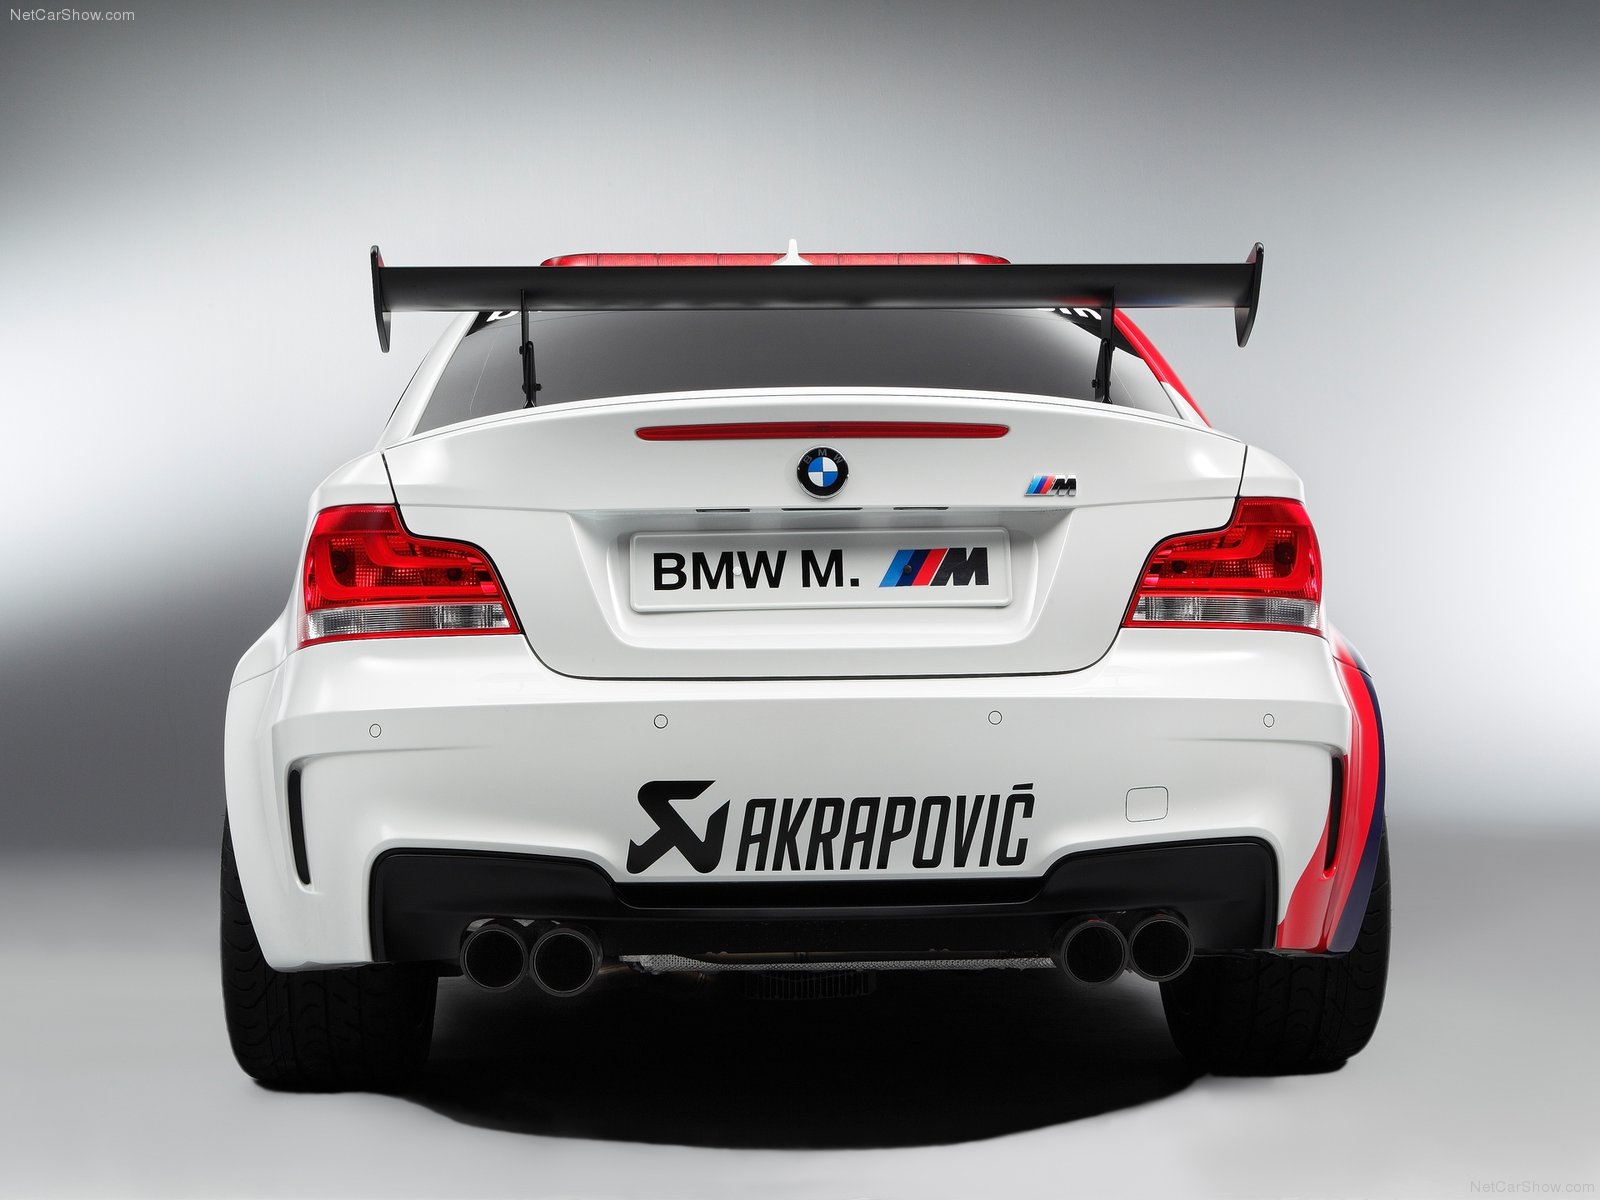 BMW S1M coupe - sleek white sports car with racing vibes